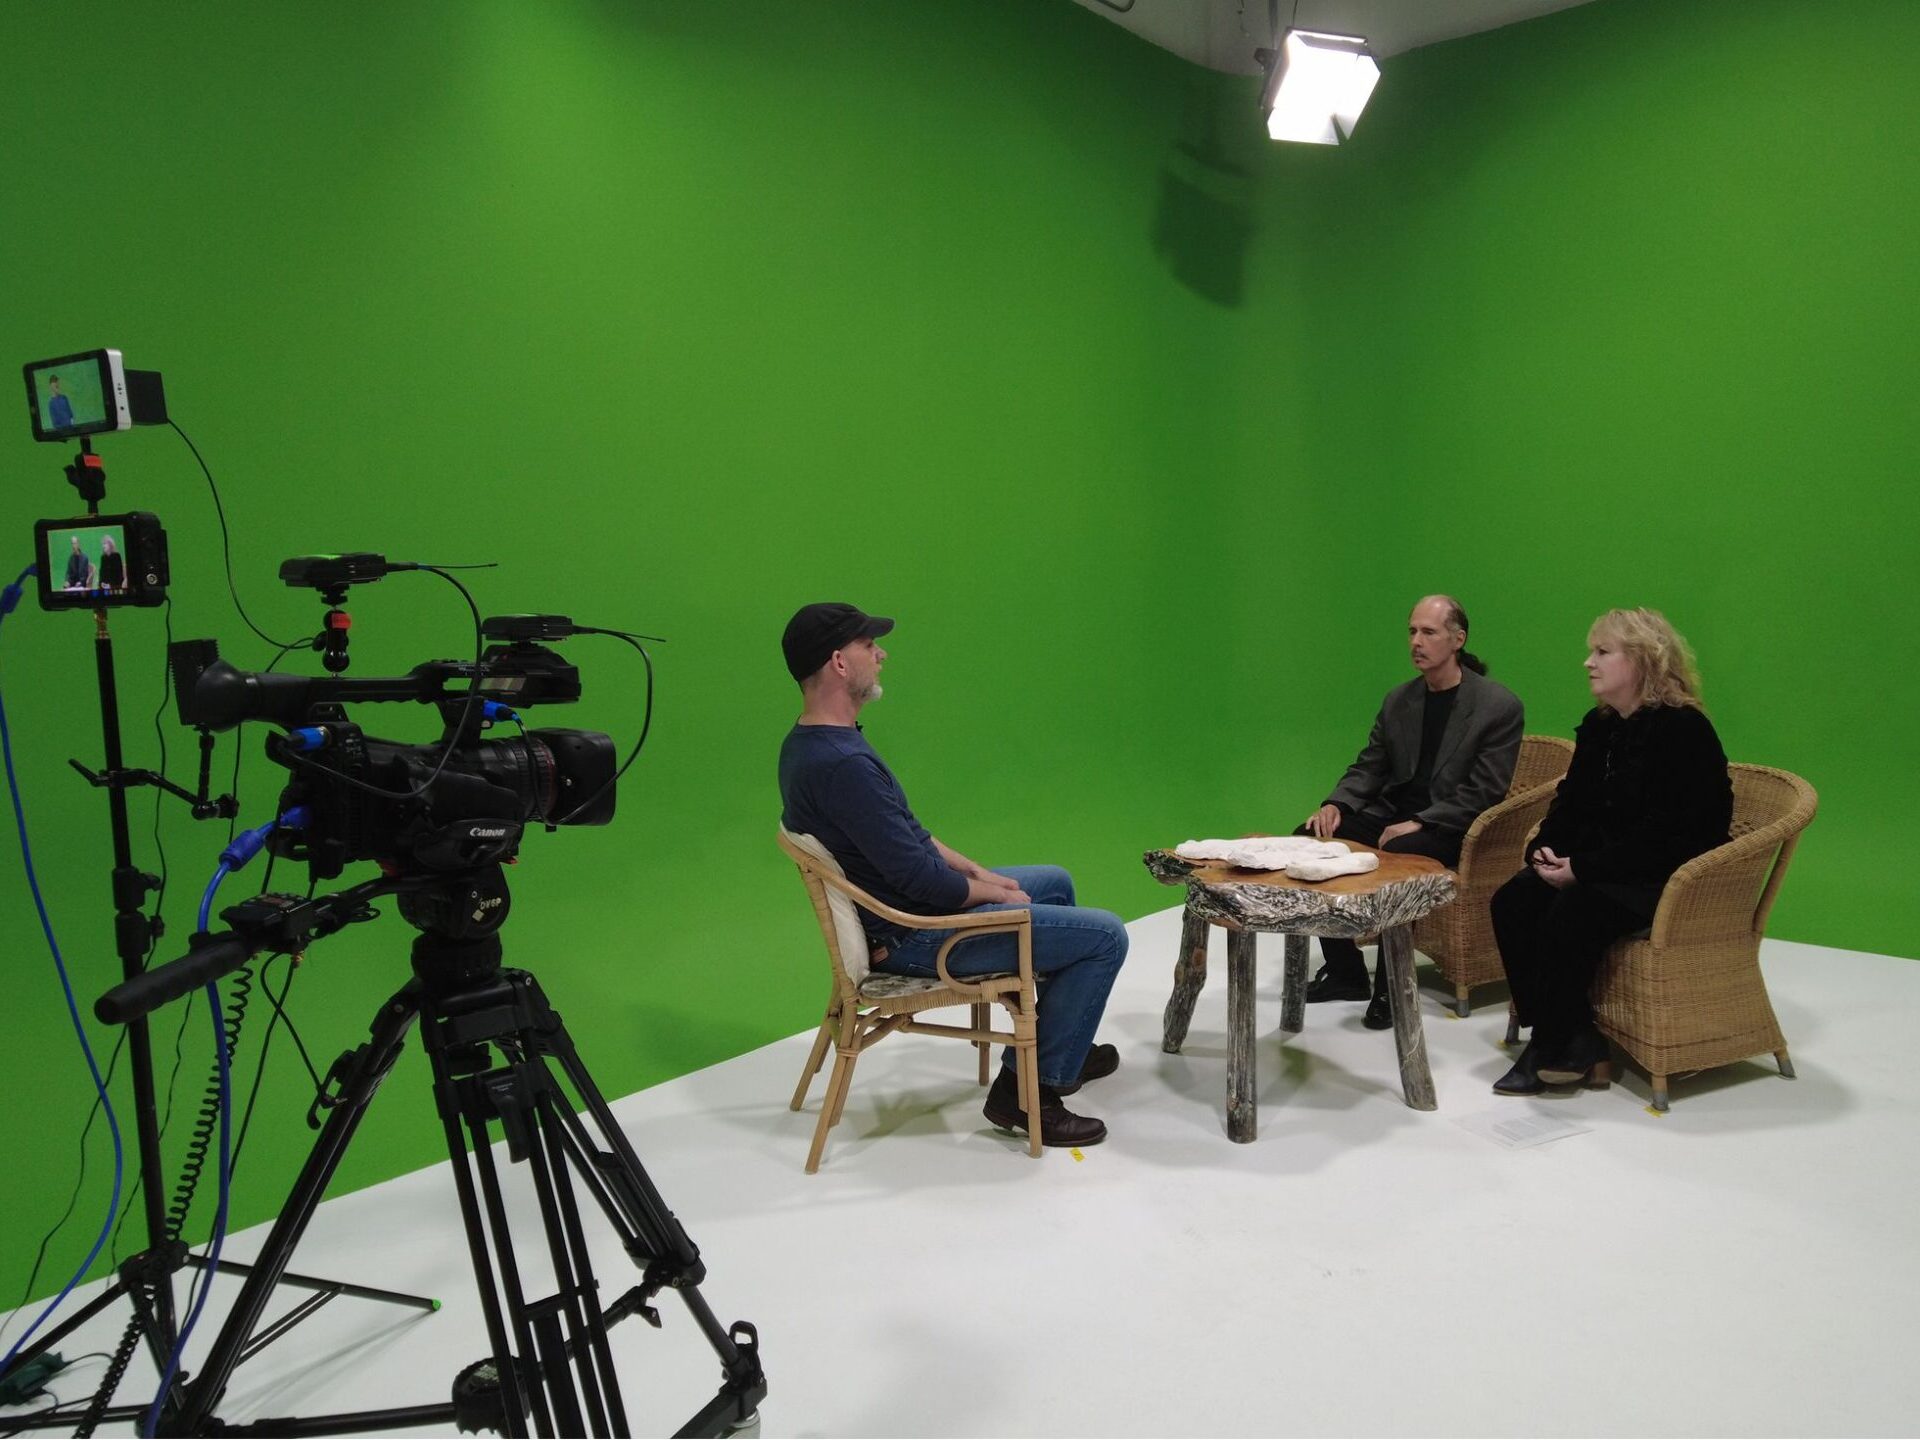 Contact TV interviews Mike Paterson in studio with green screen at Genie Lamp Studios Markham